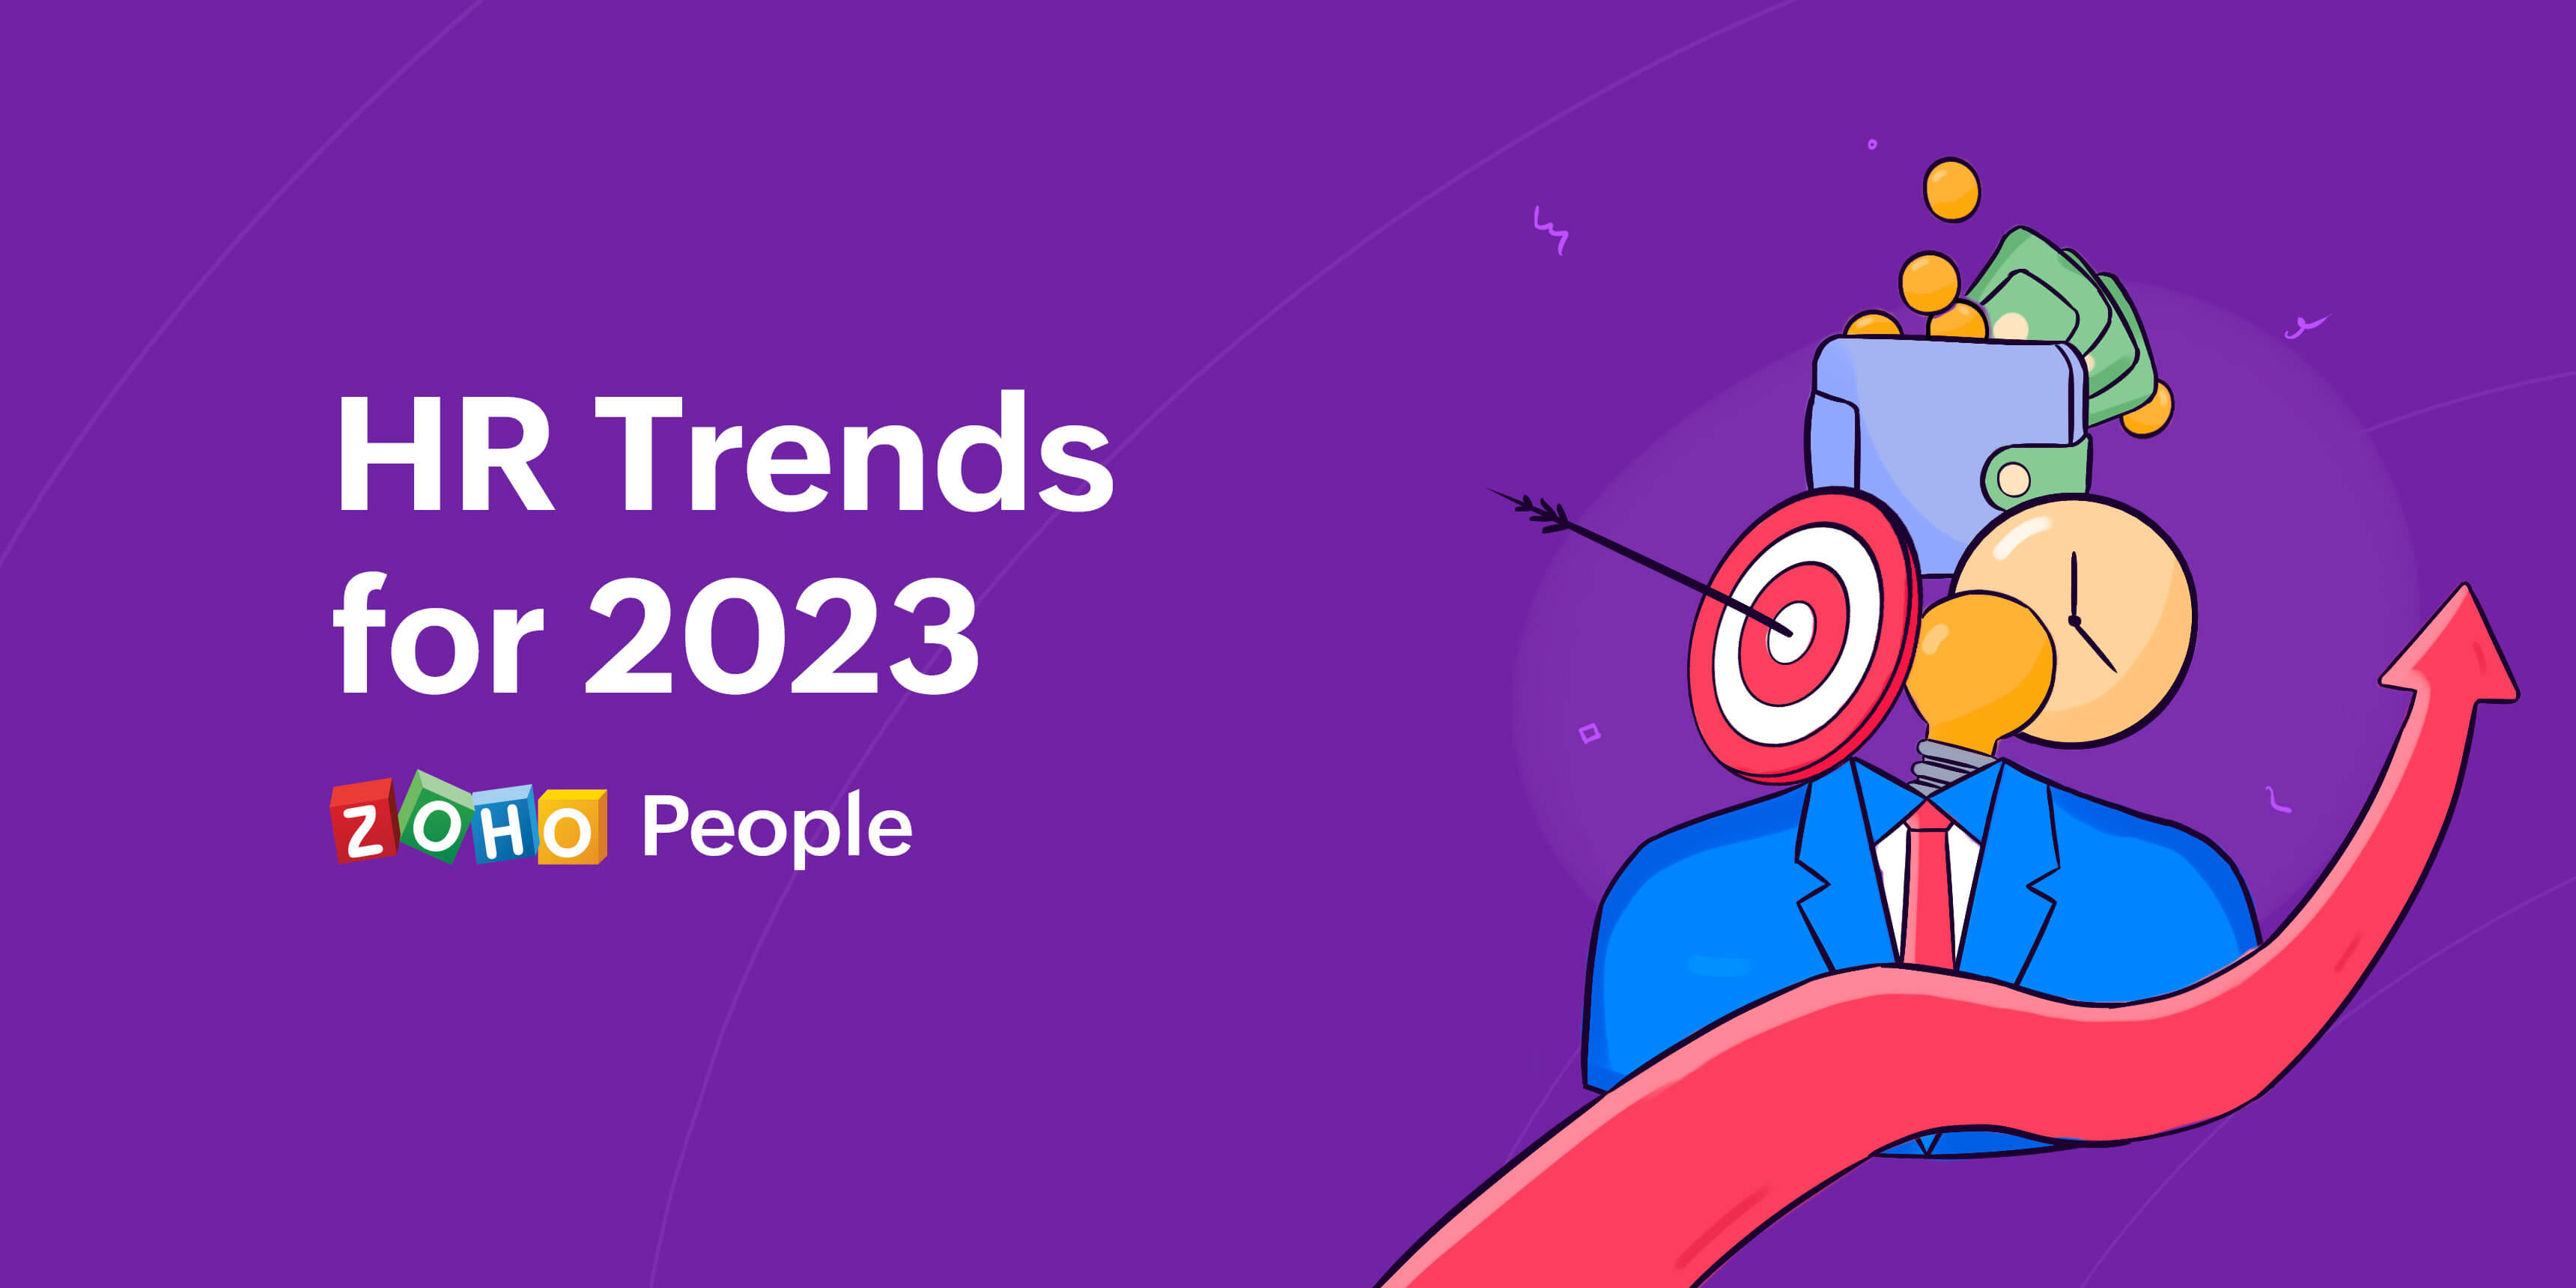 HR trends for 2023